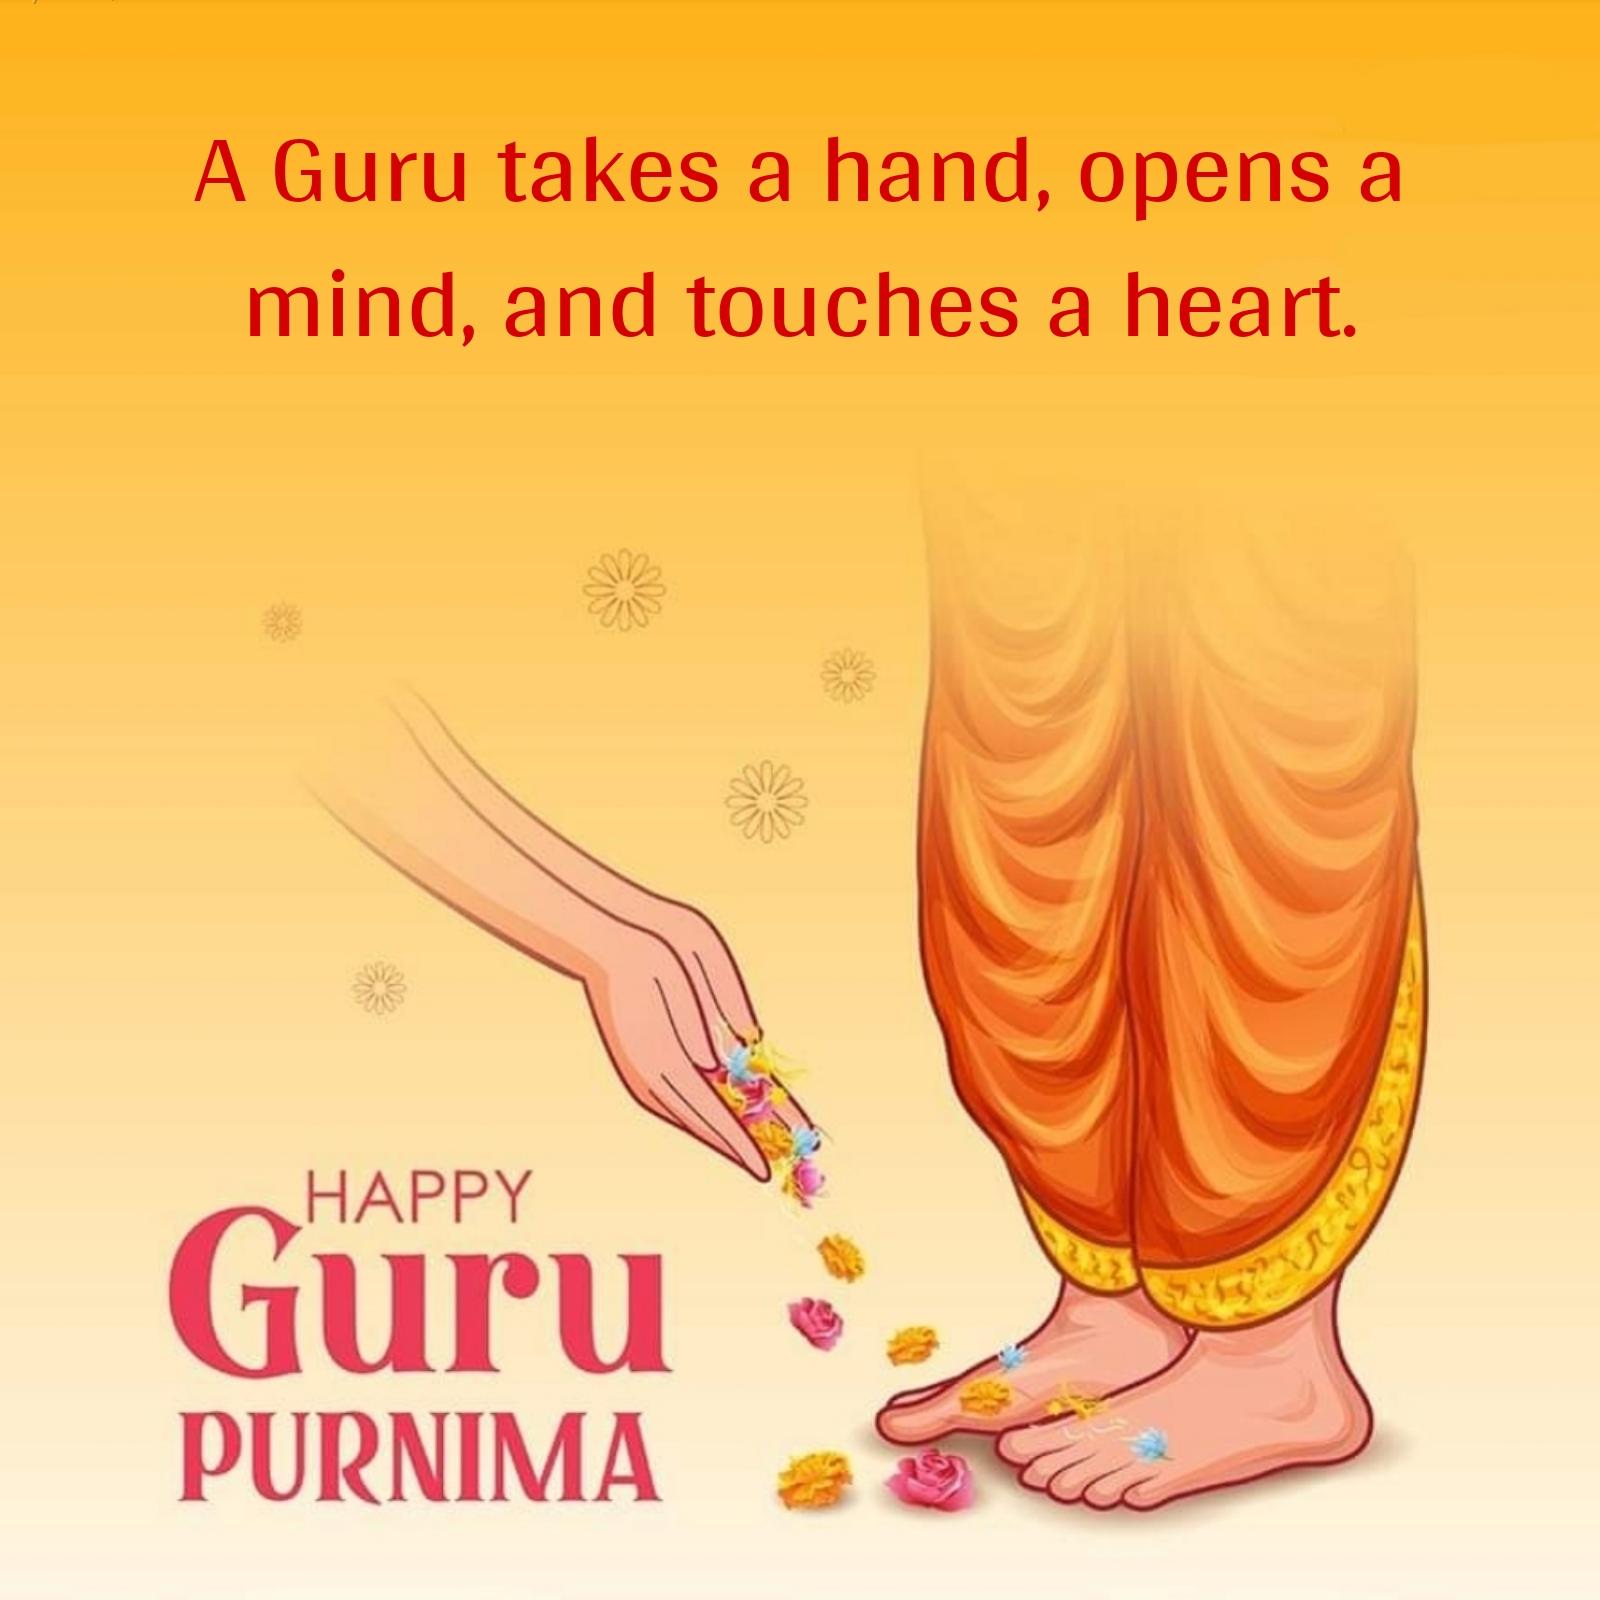 A Guru takes a hand opens a mind and touches a heart